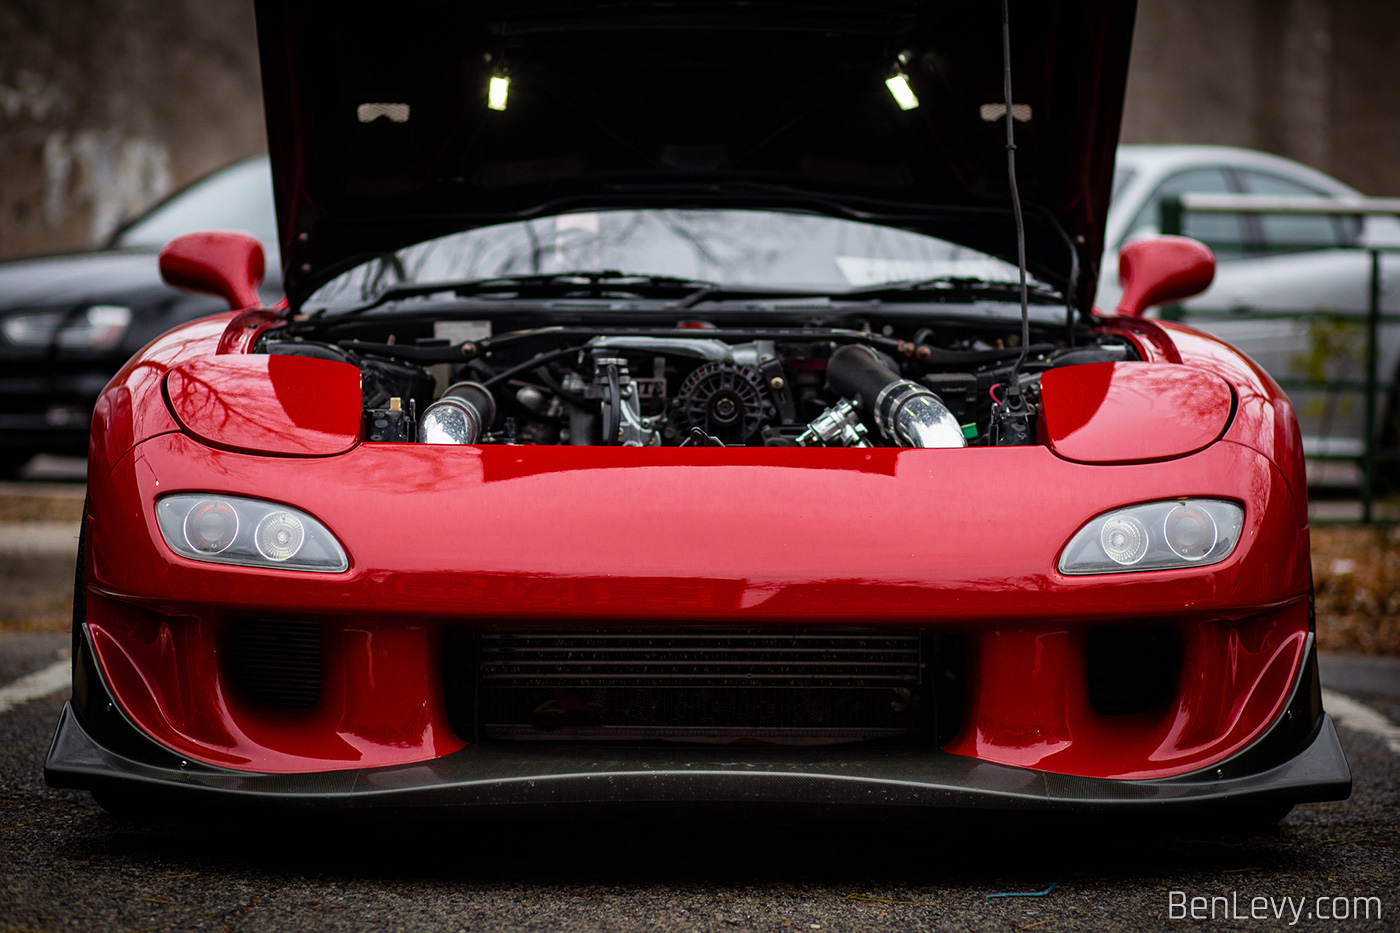 Front Bumper of JDM Mazda RX-7 in Red